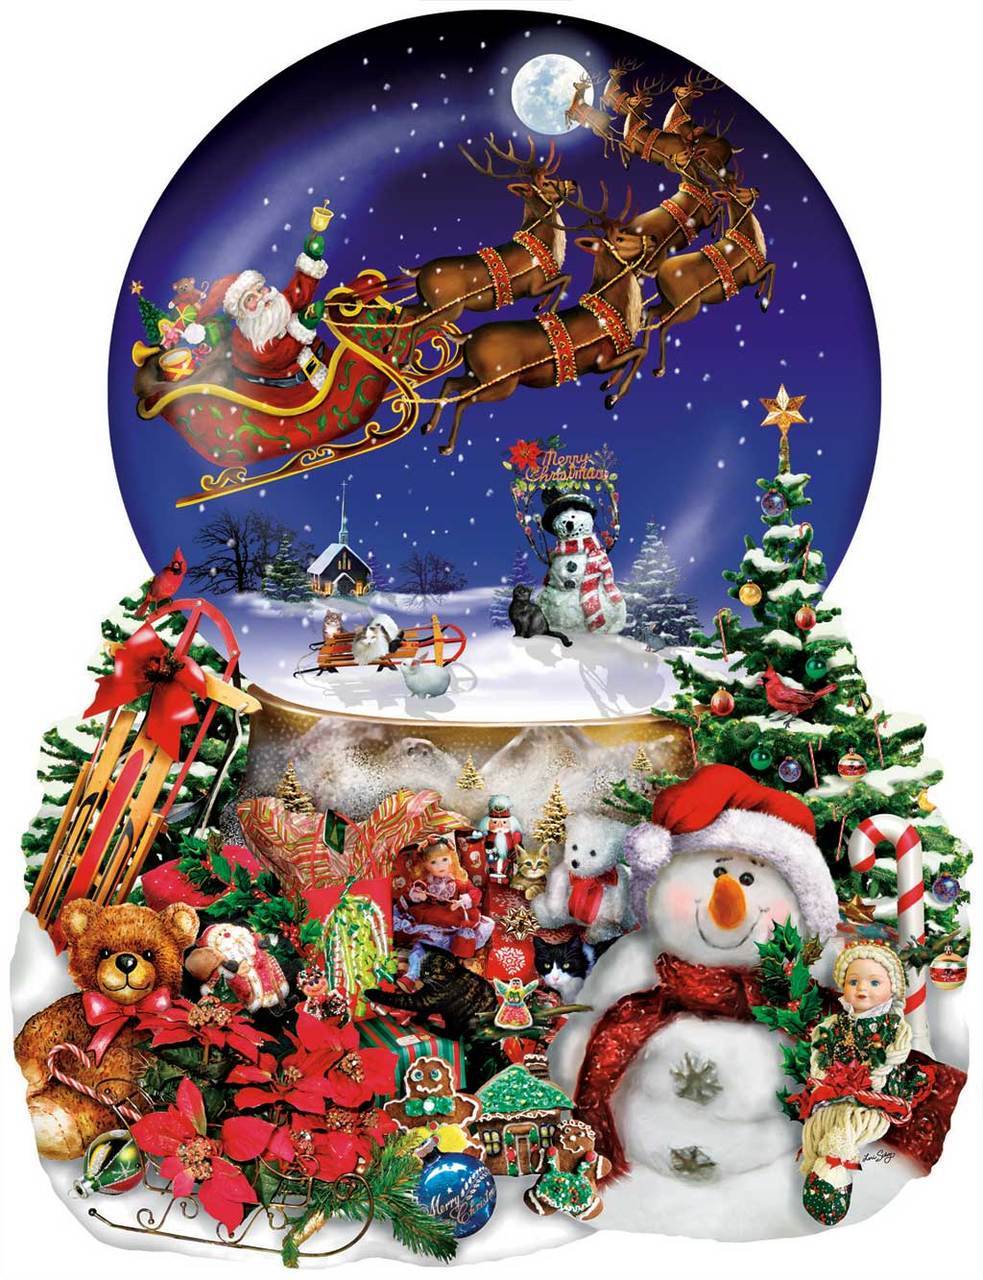 Santa's Snowy Ride - 1000pc Shaped Jigsaw Puzzle By Sunsout